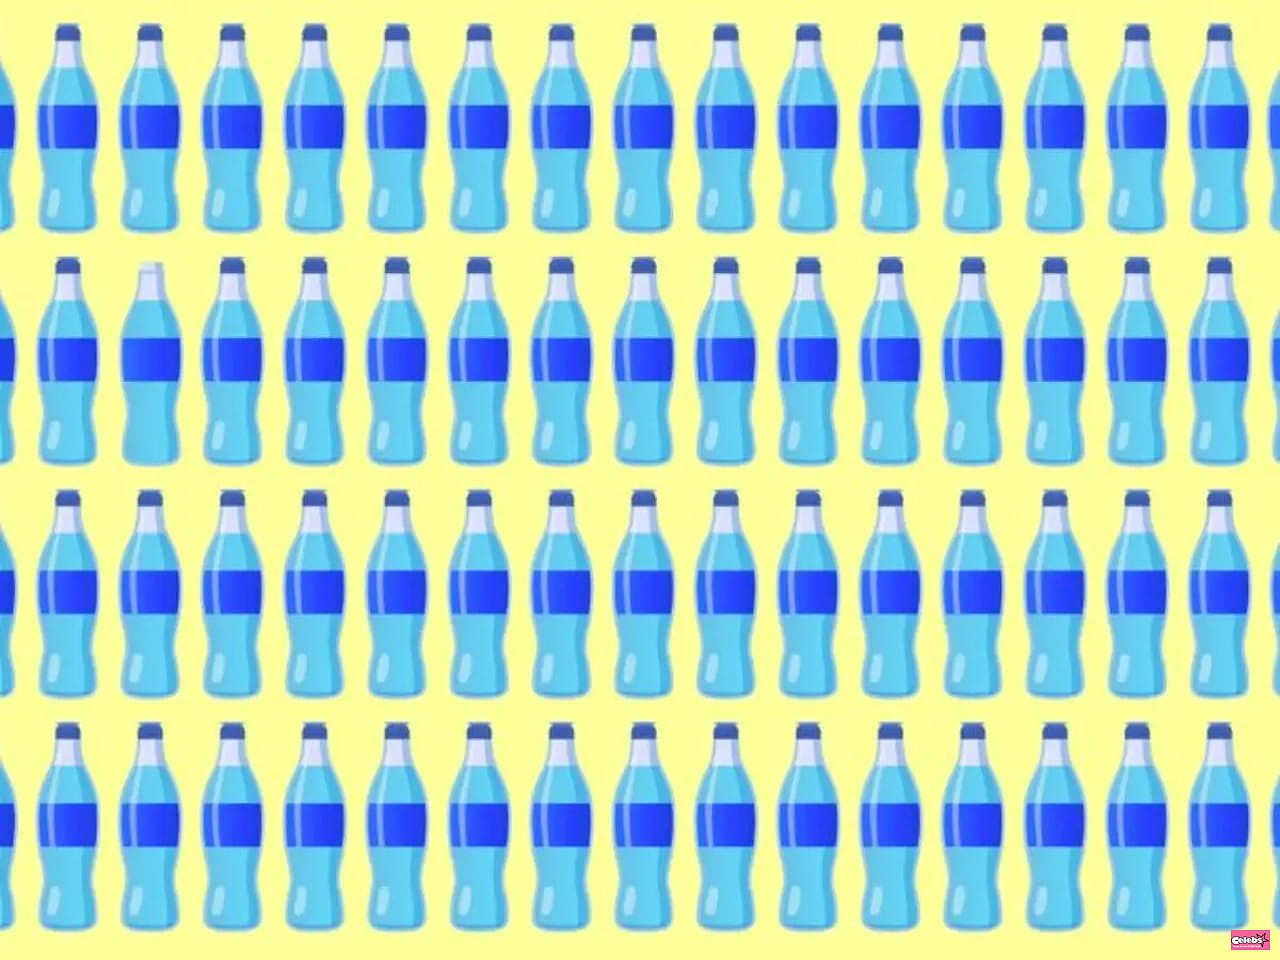 Try to beat this optical illusion: can you find 3 bottles without caps in the picture?